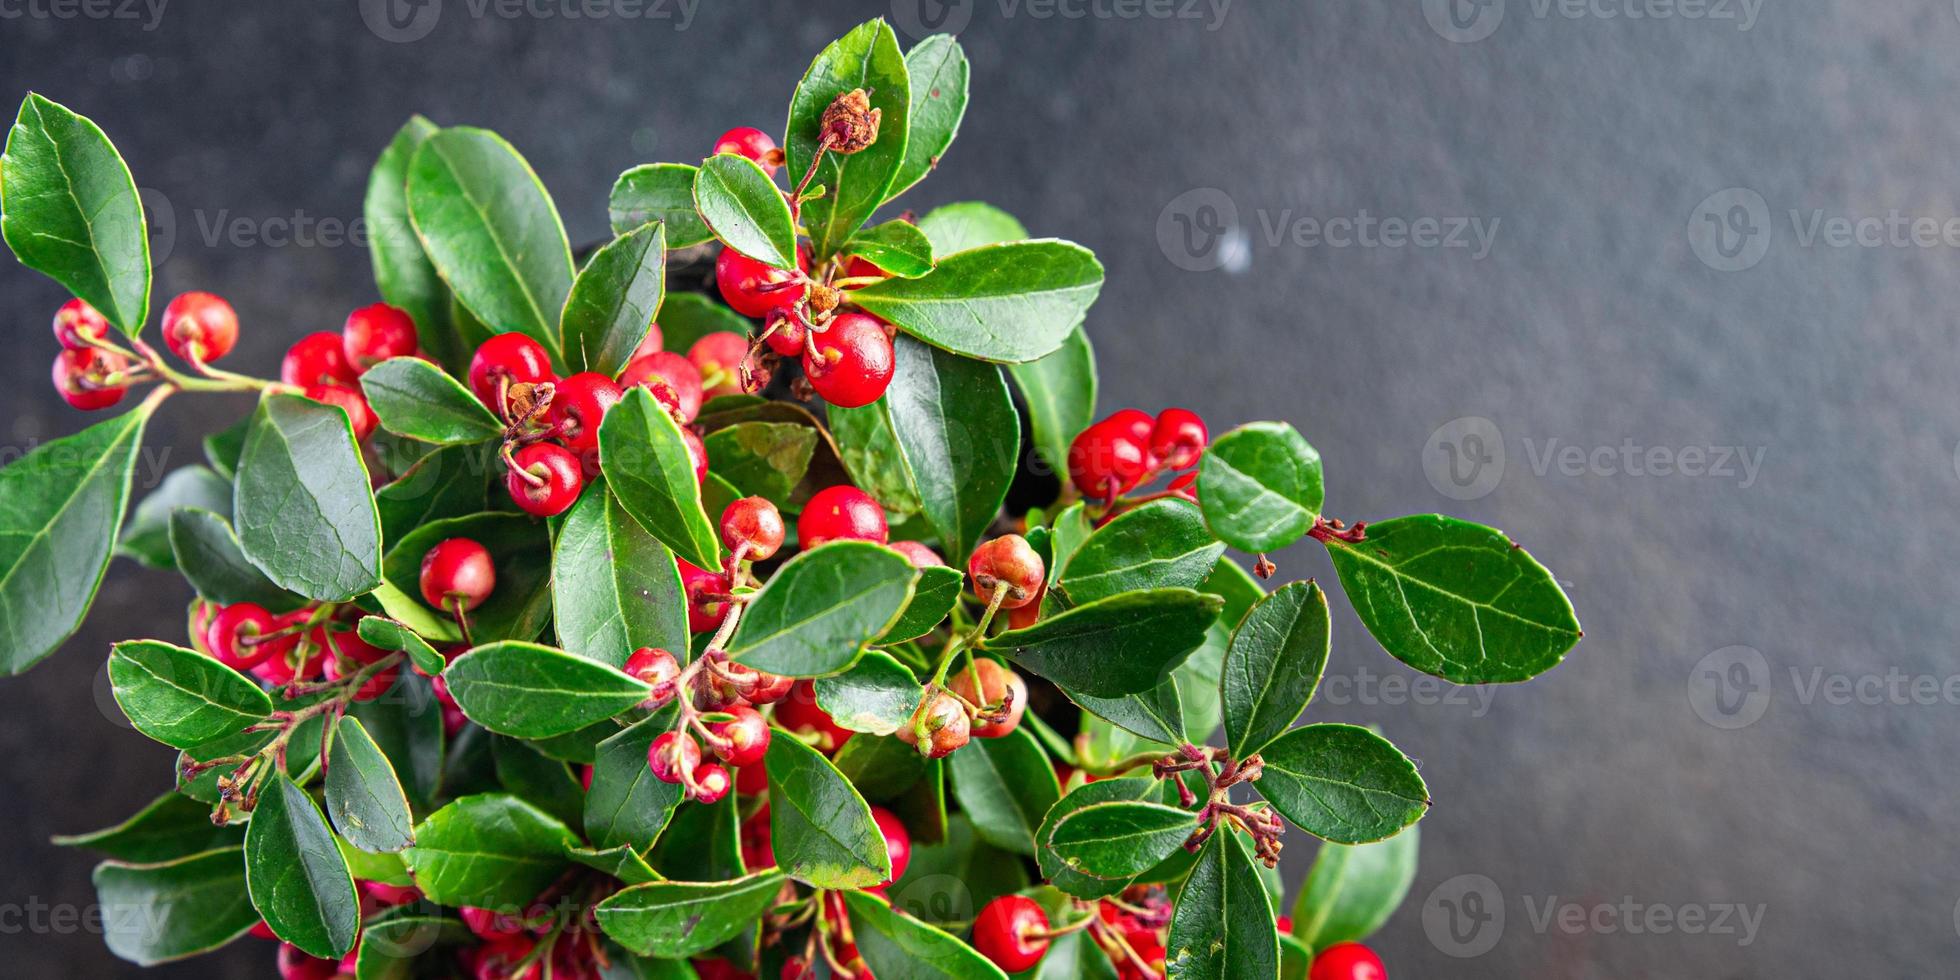 Gaultheria flower plant red berries indoor photo